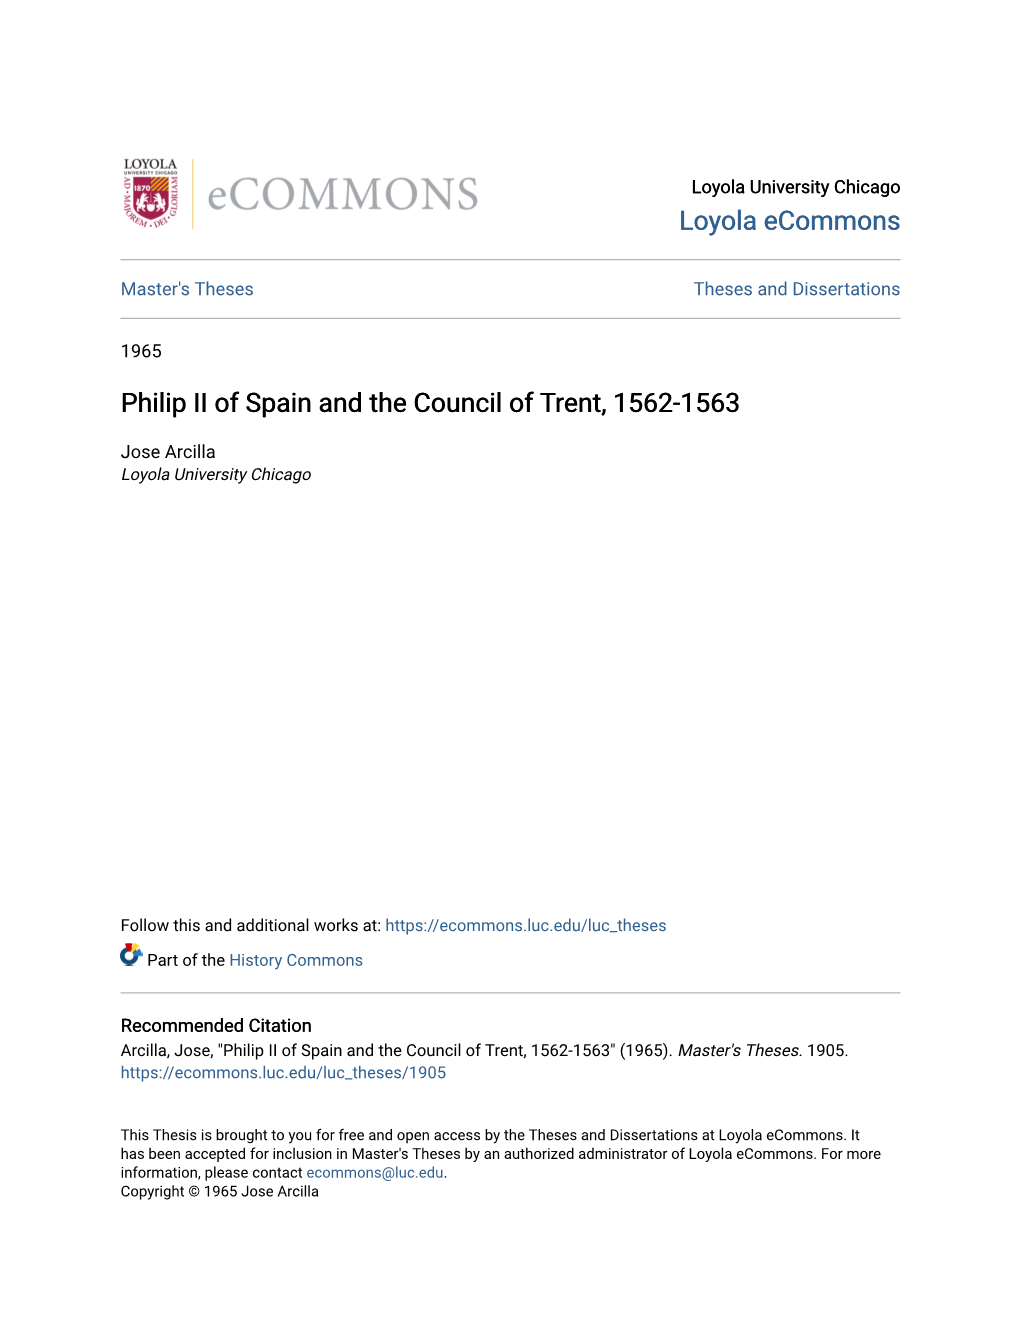 Philip II of Spain and the Council of Trent, 1562-1563